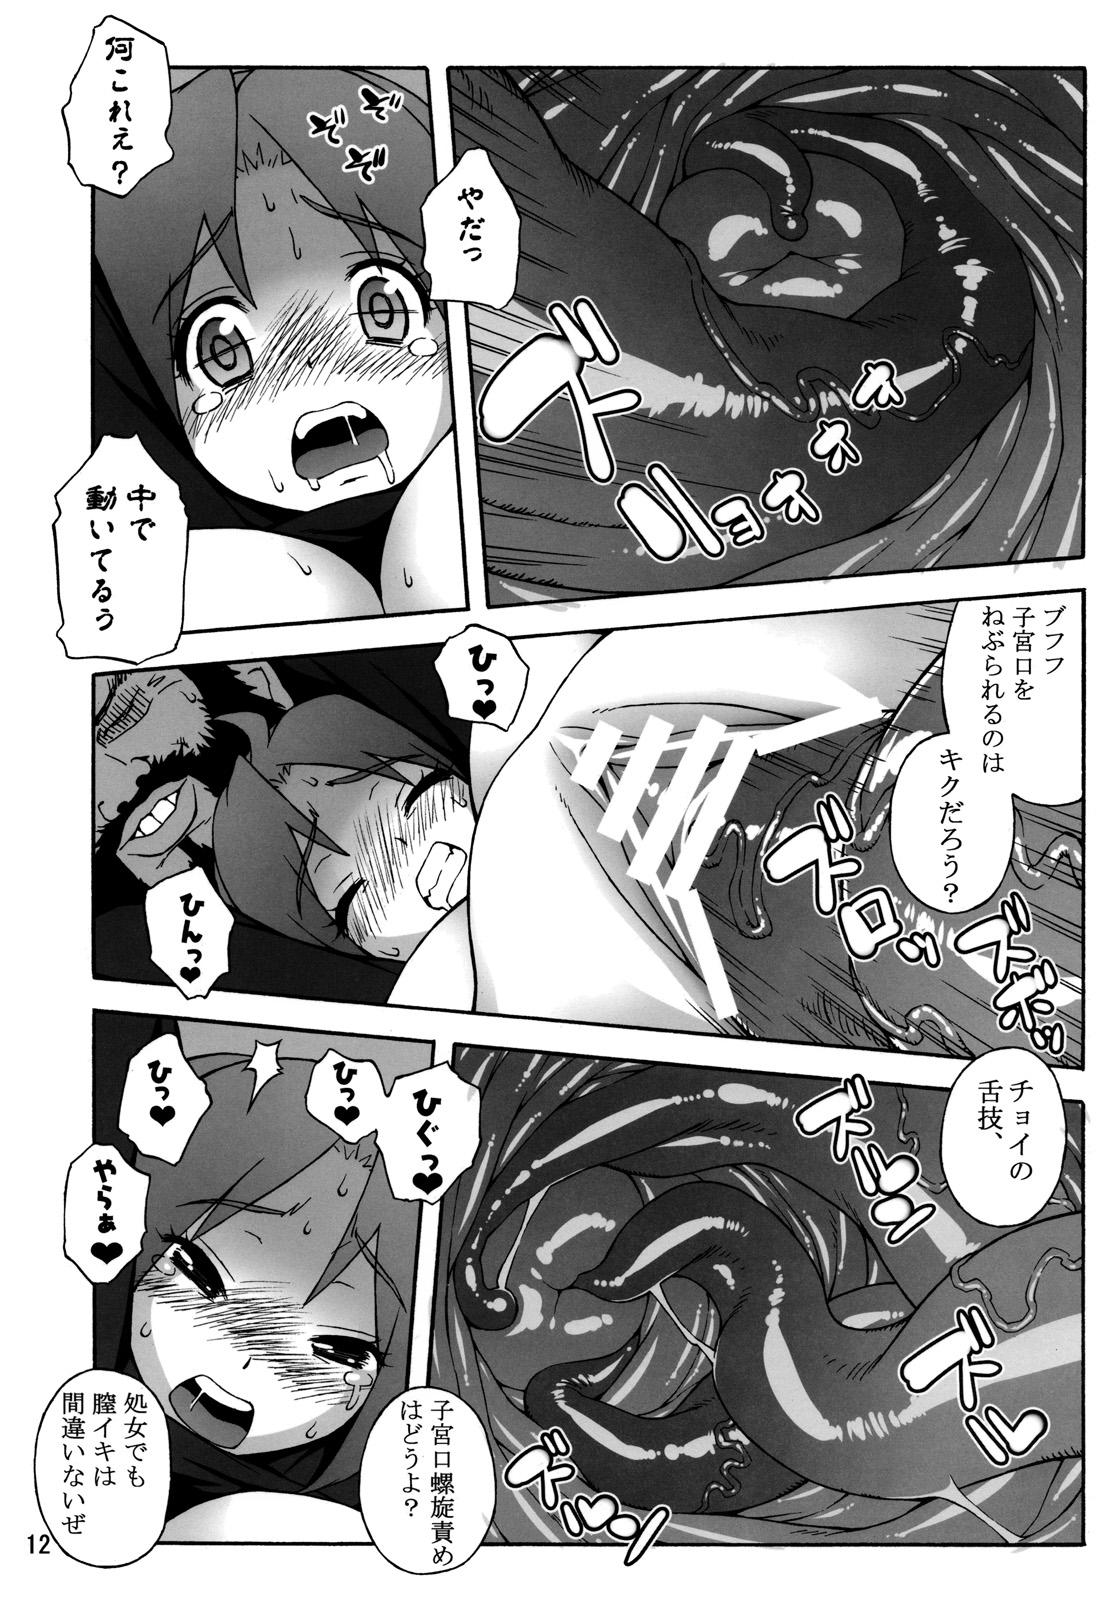 Punishment A.N.T.R. - King of fighters Love Making - Page 11